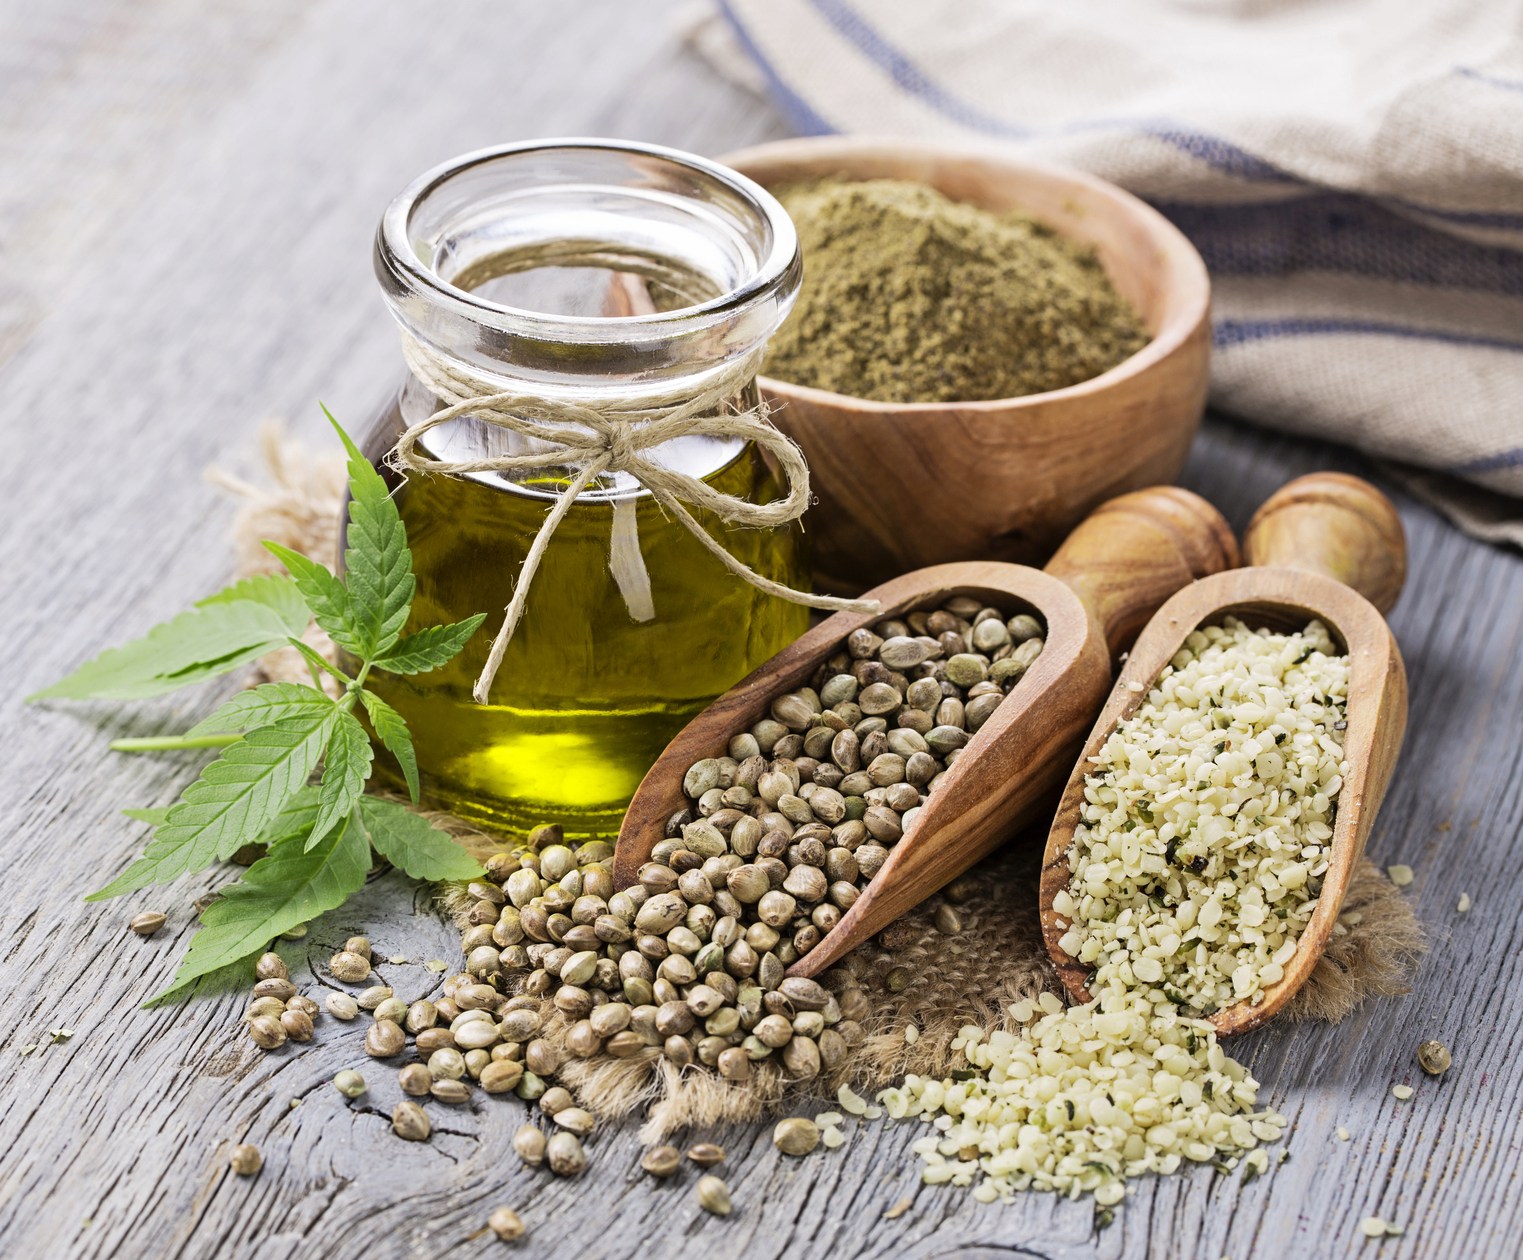 Surprising Health Benefits Associated With Hempseed Oil